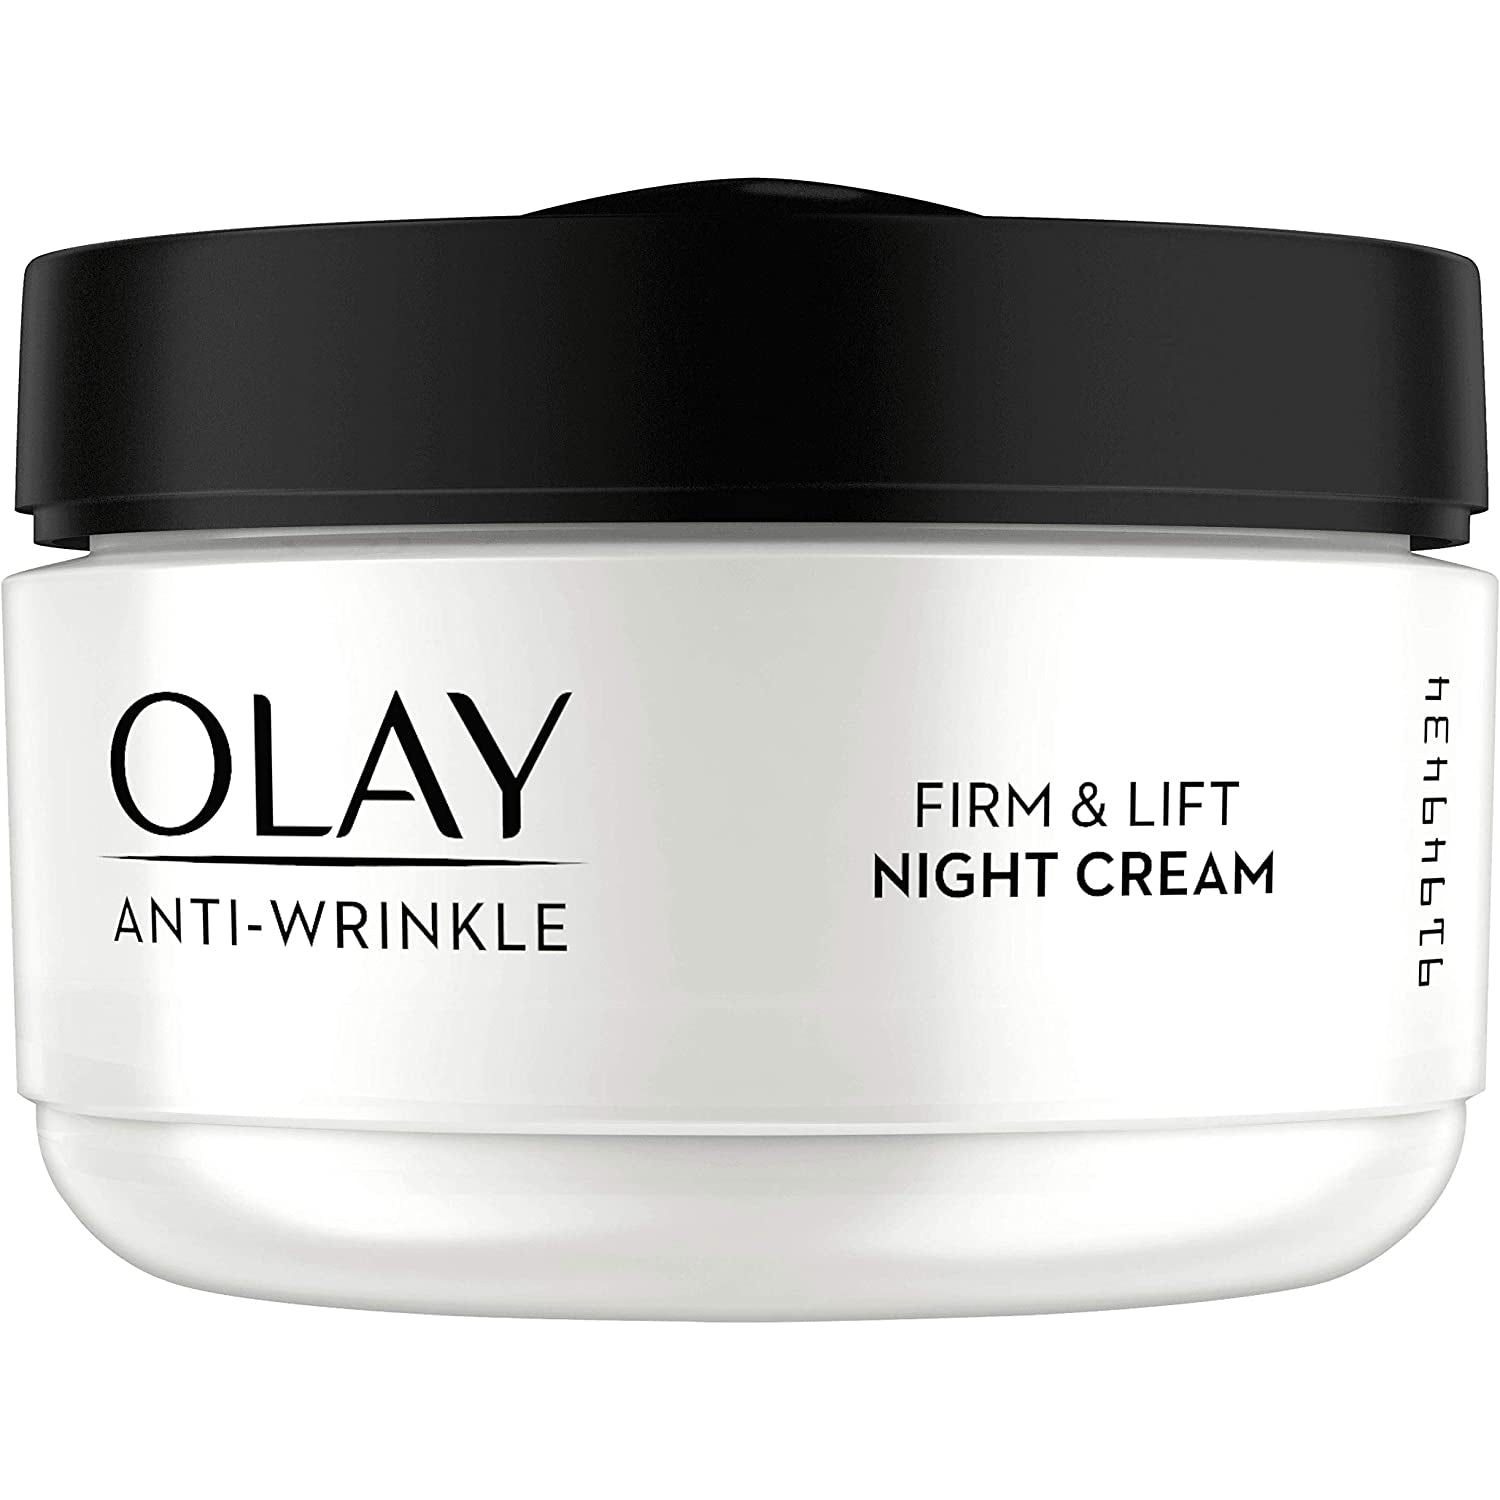 Olay Anti-Wrinkle Firm and Lift Anti-Ageing Moisturiser Night Cream - 50 ml - Healthxpress.ie